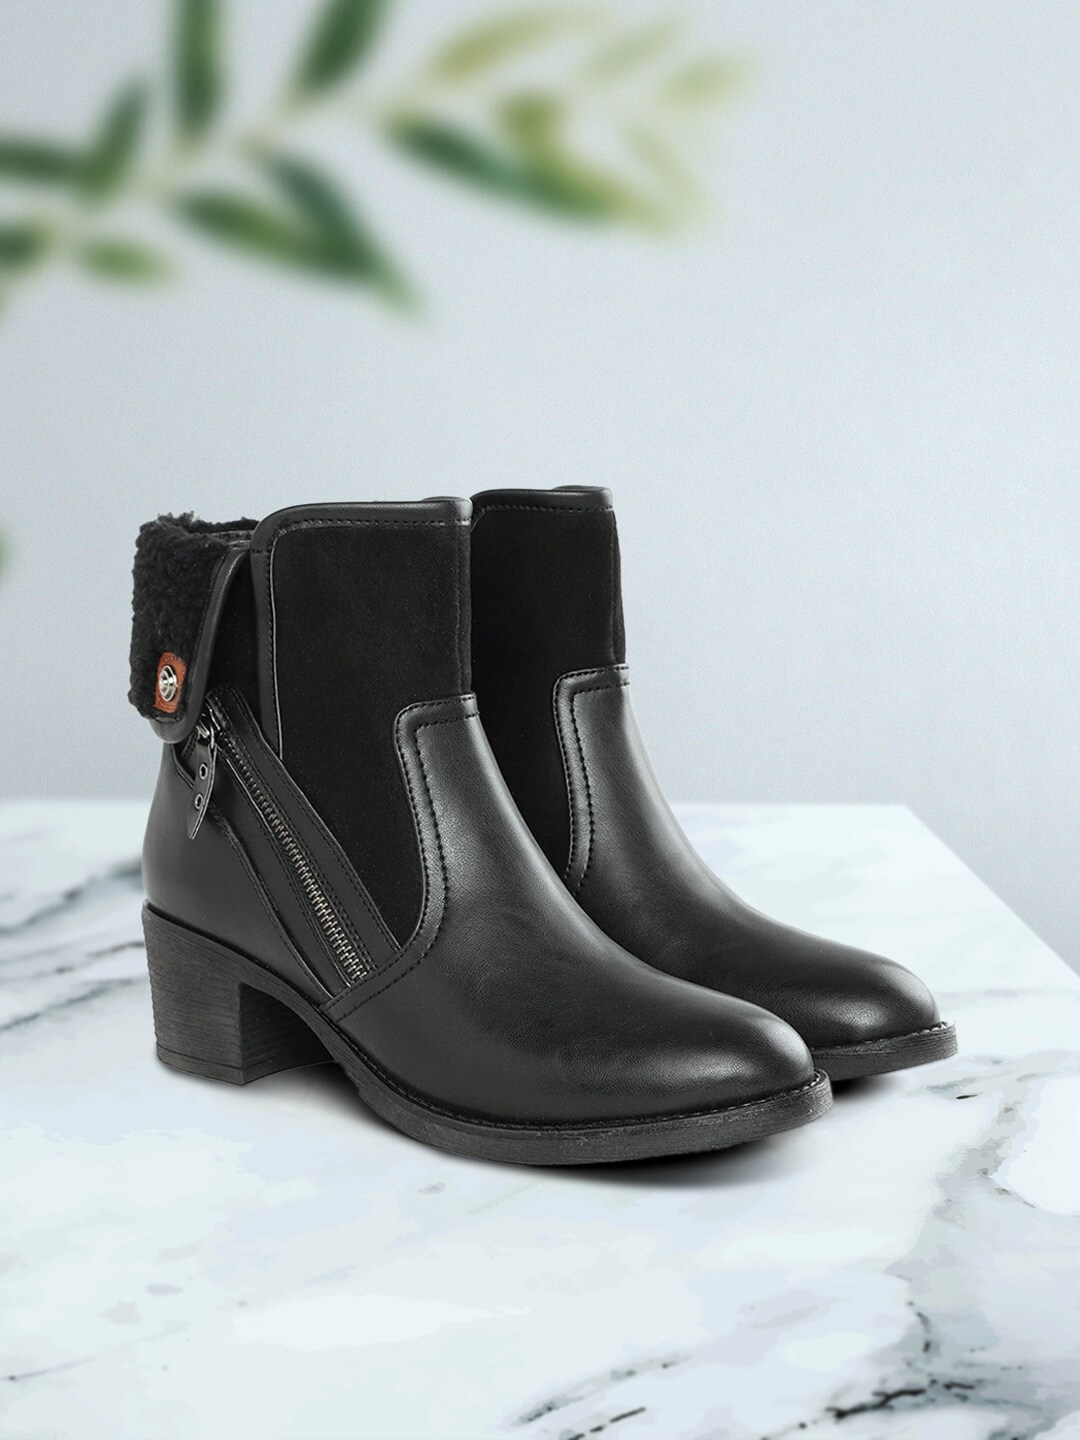 Roadster Black Block Mid Top Heeled Boots Price in India